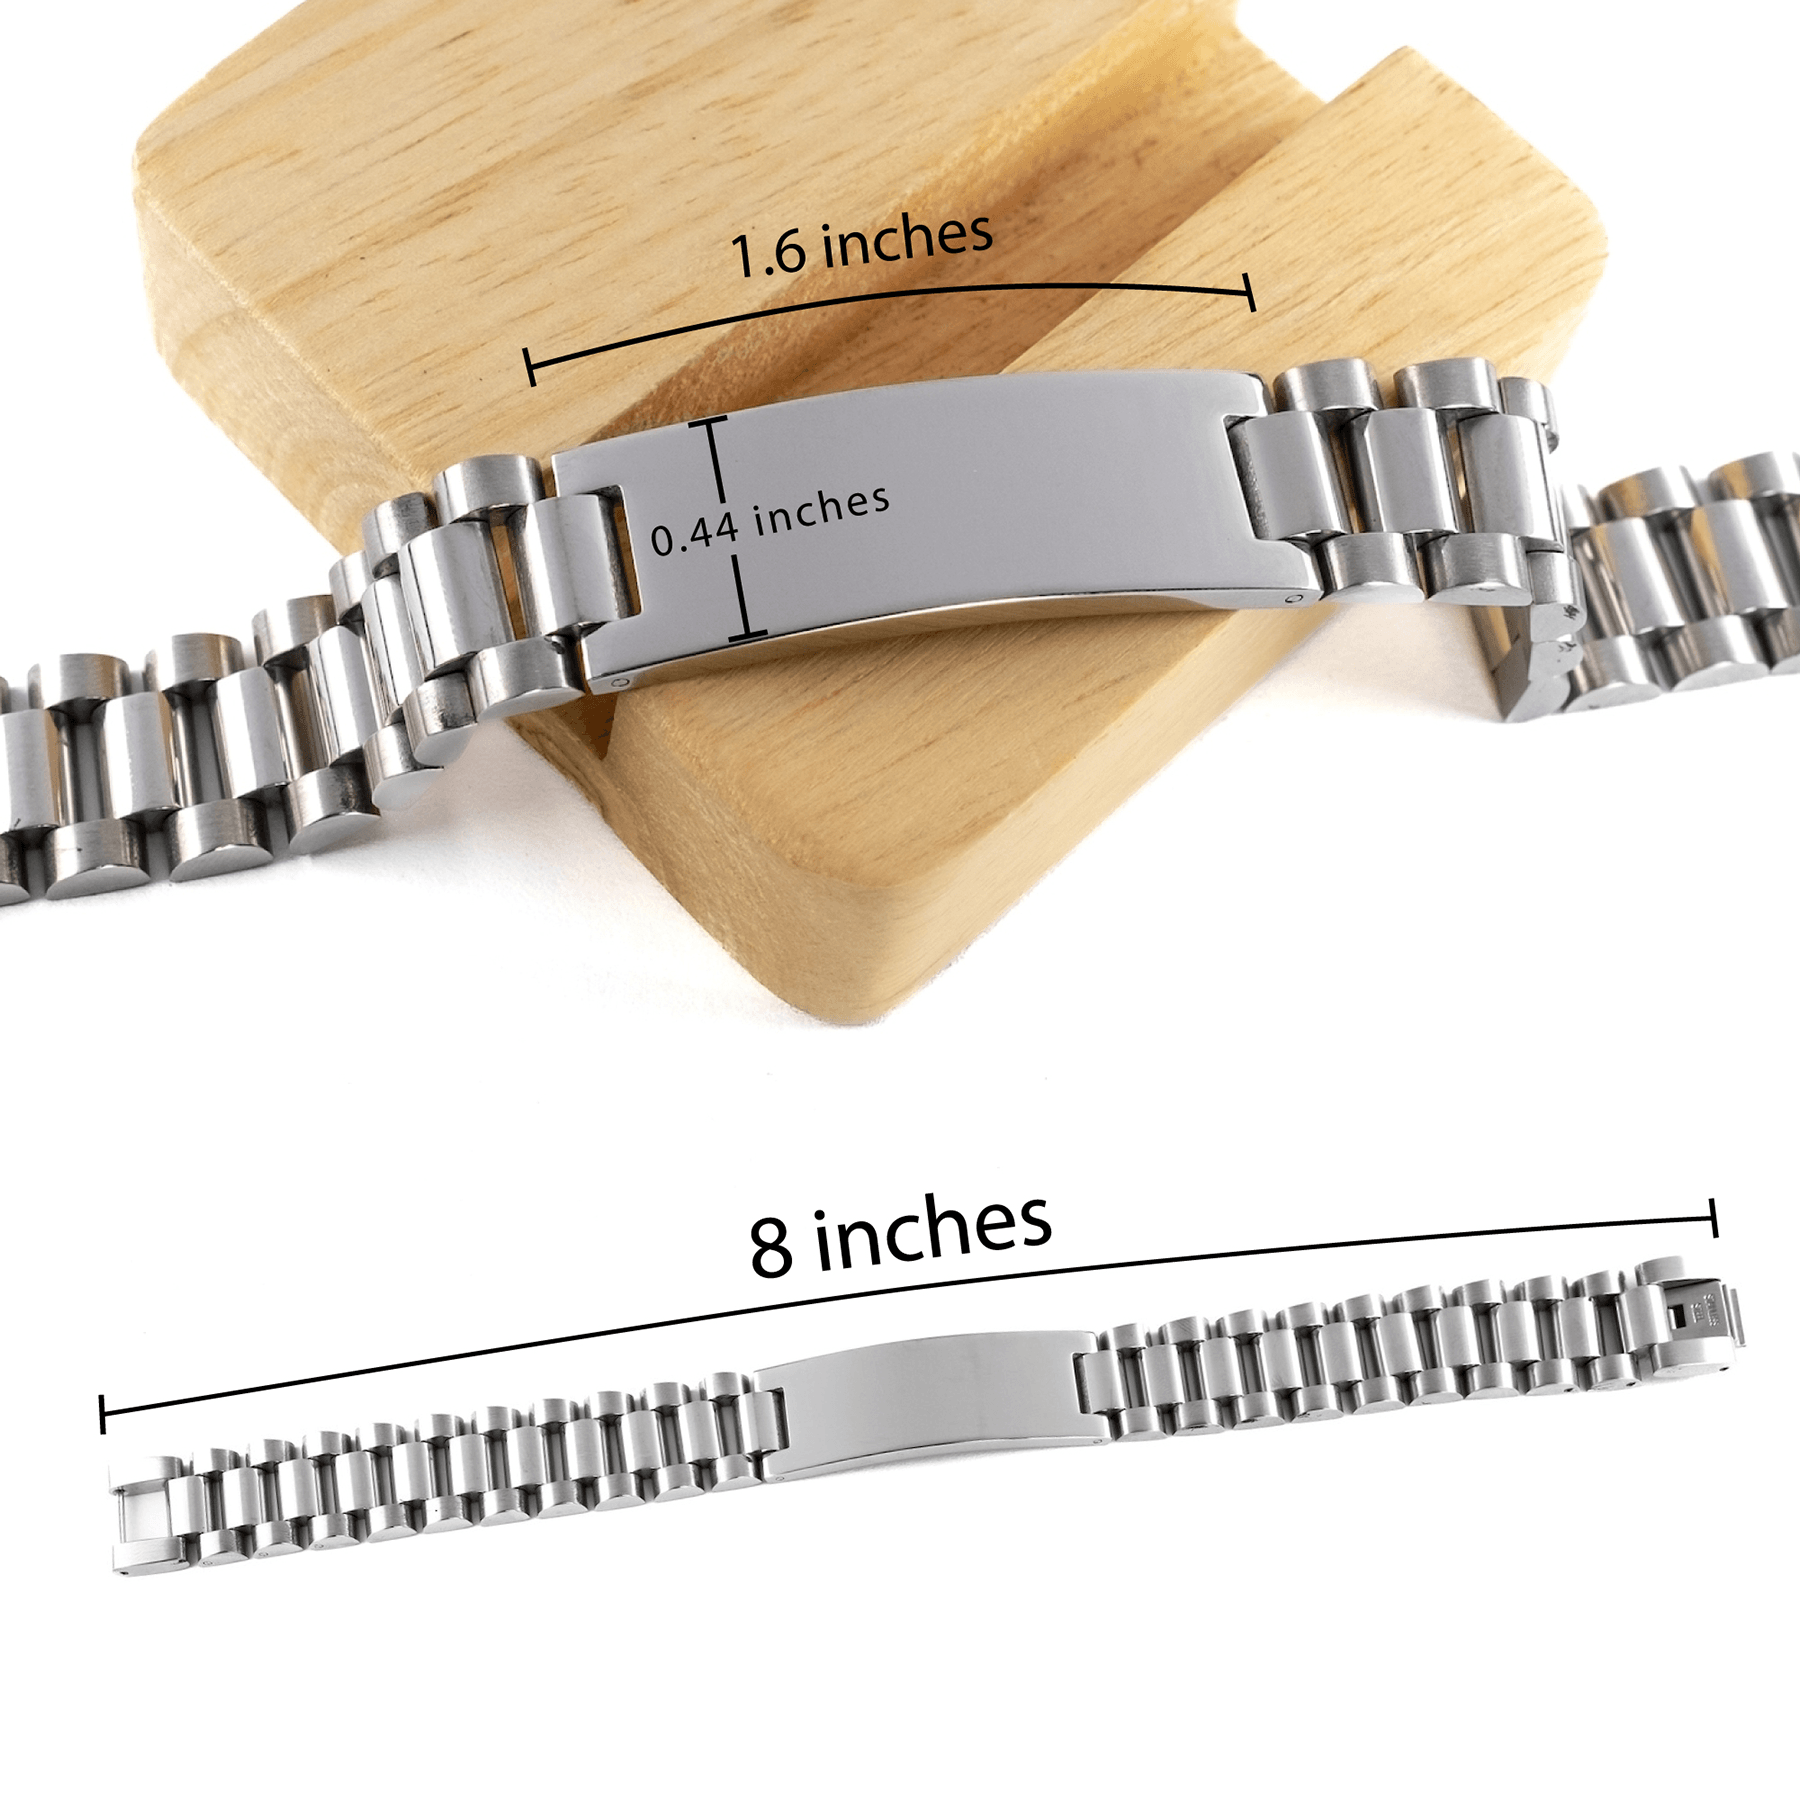 Barber Ladder Stainless Steel Engraved Bracelet - Thanks for being who you are - Birthday Christmas Jewelry Gifts Coworkers Colleague Boss - Mallard Moon Gift Shop